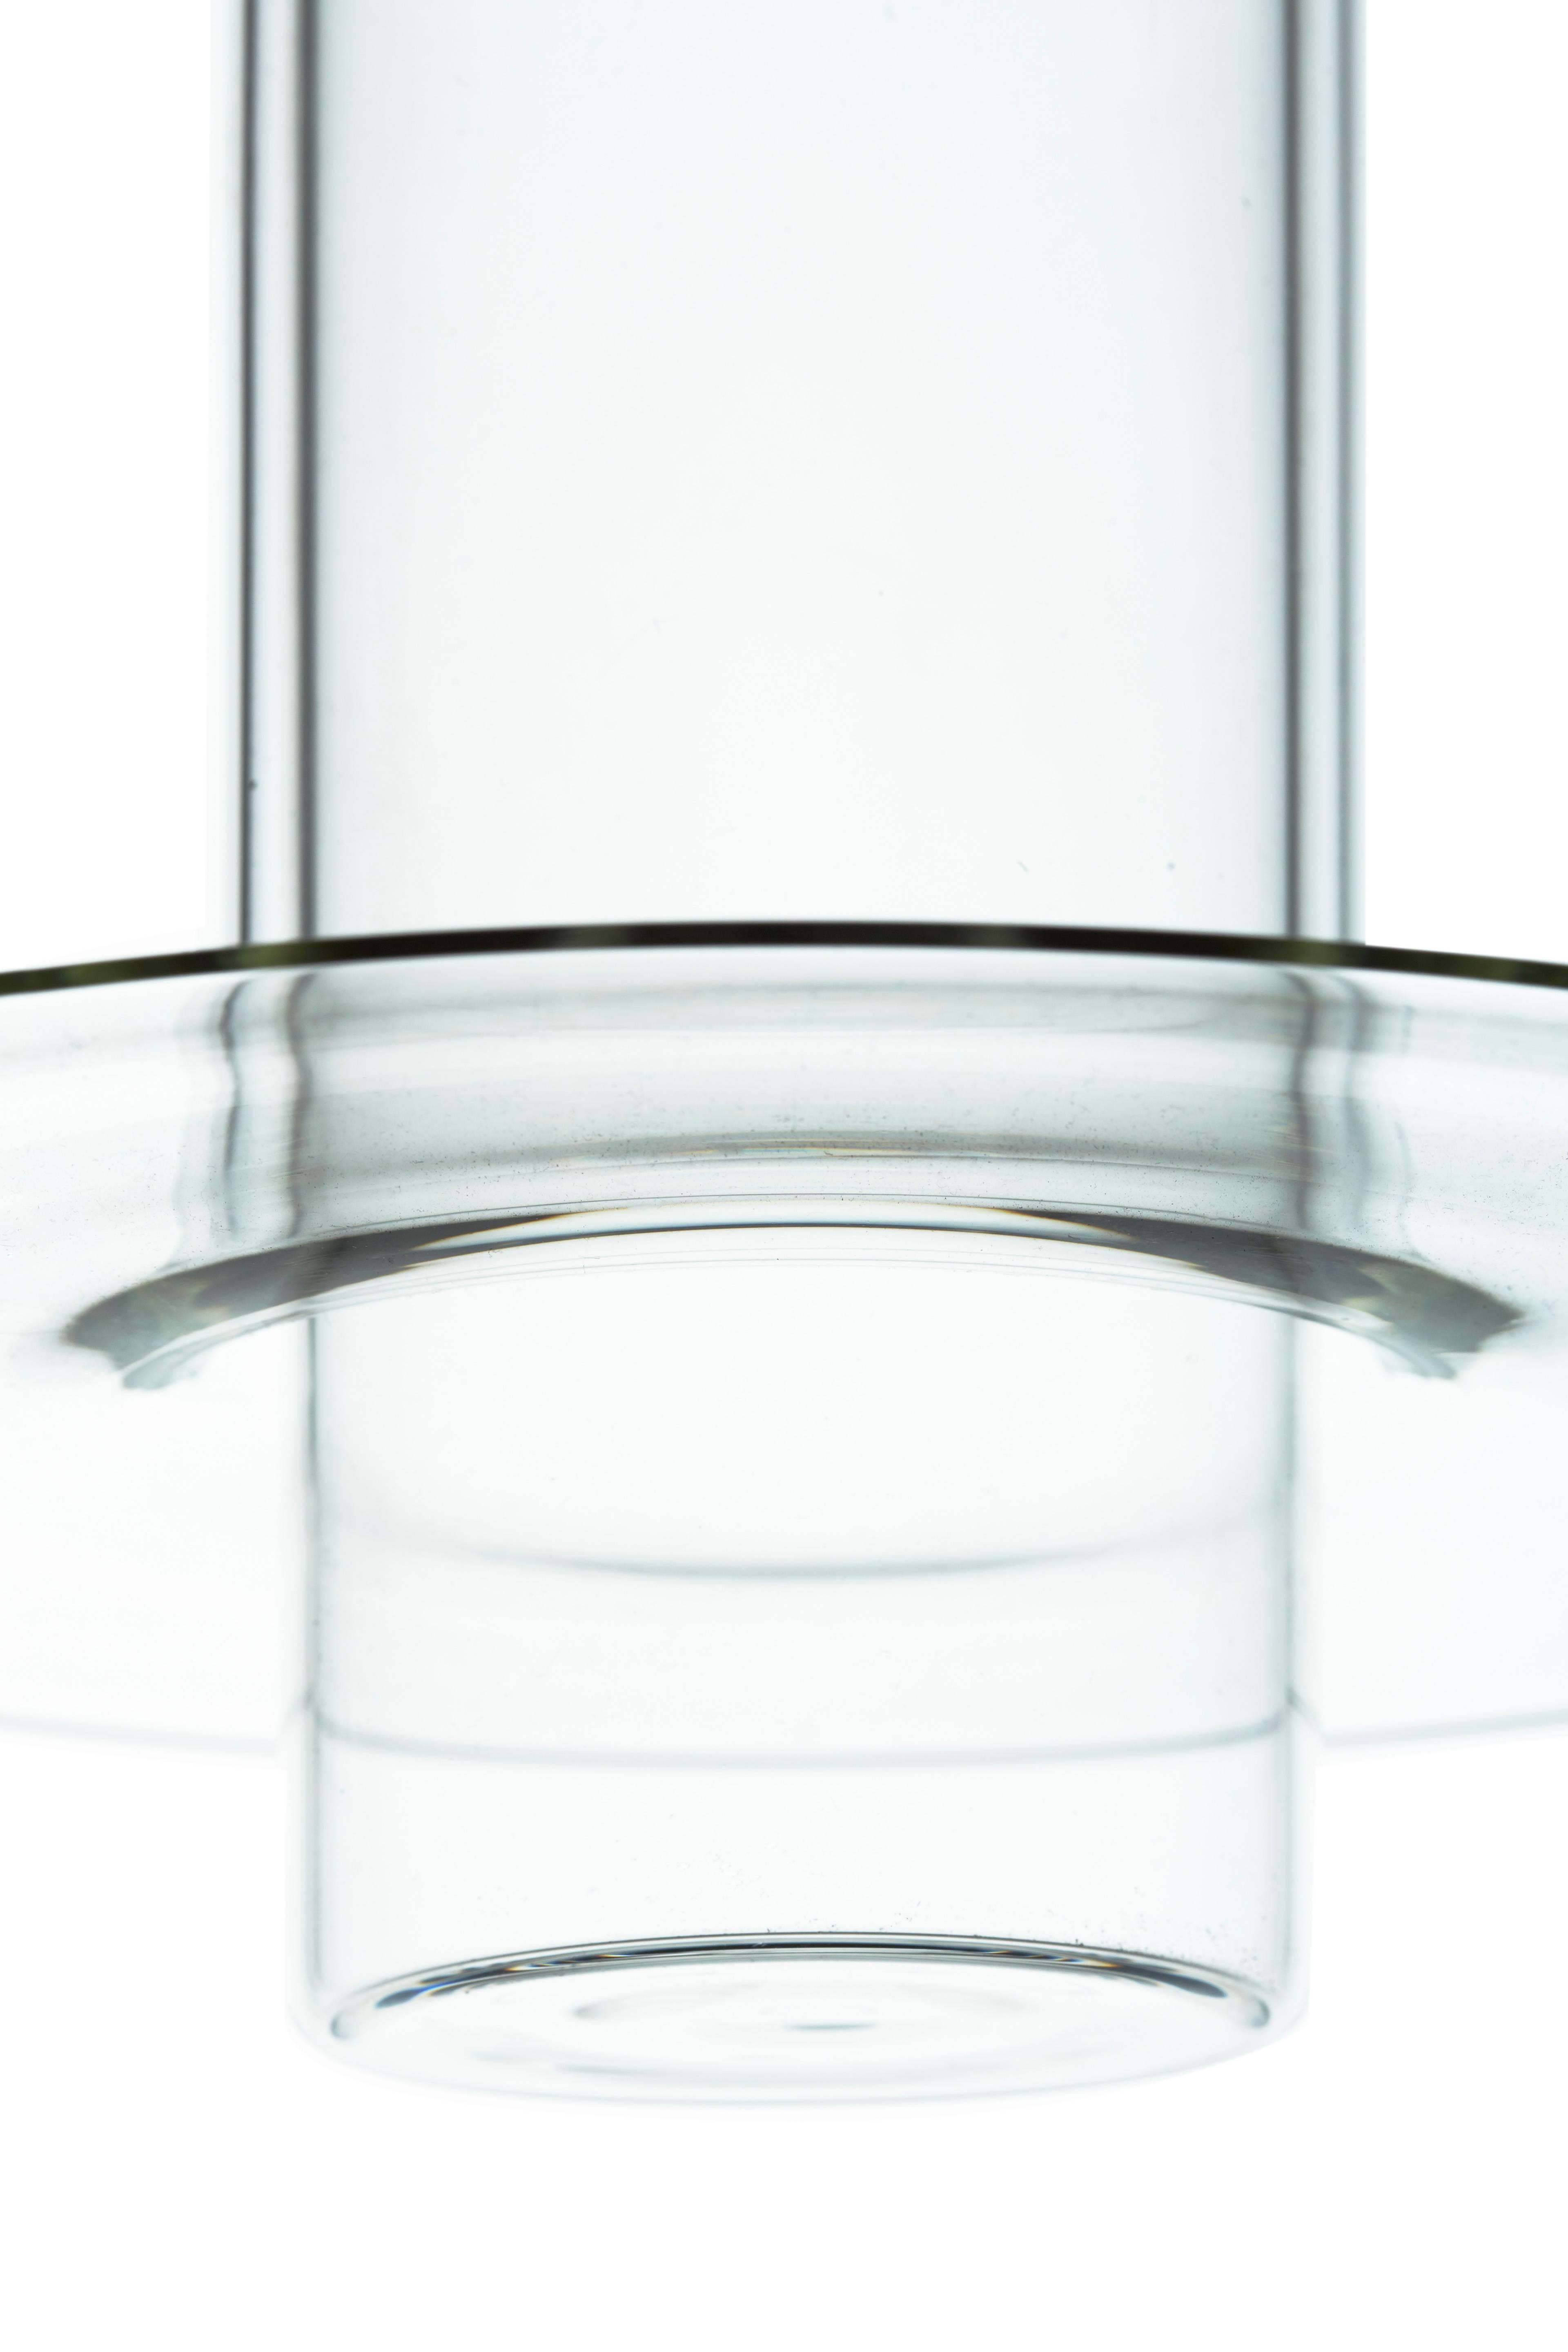 Pawson's design sets one handmade glass cylinder within another, the outer cylinder flaring into a refined disc lip at its lower edge. The lamp casts light downwards, but its clear body also glows along its entire length.

(Please note, interior